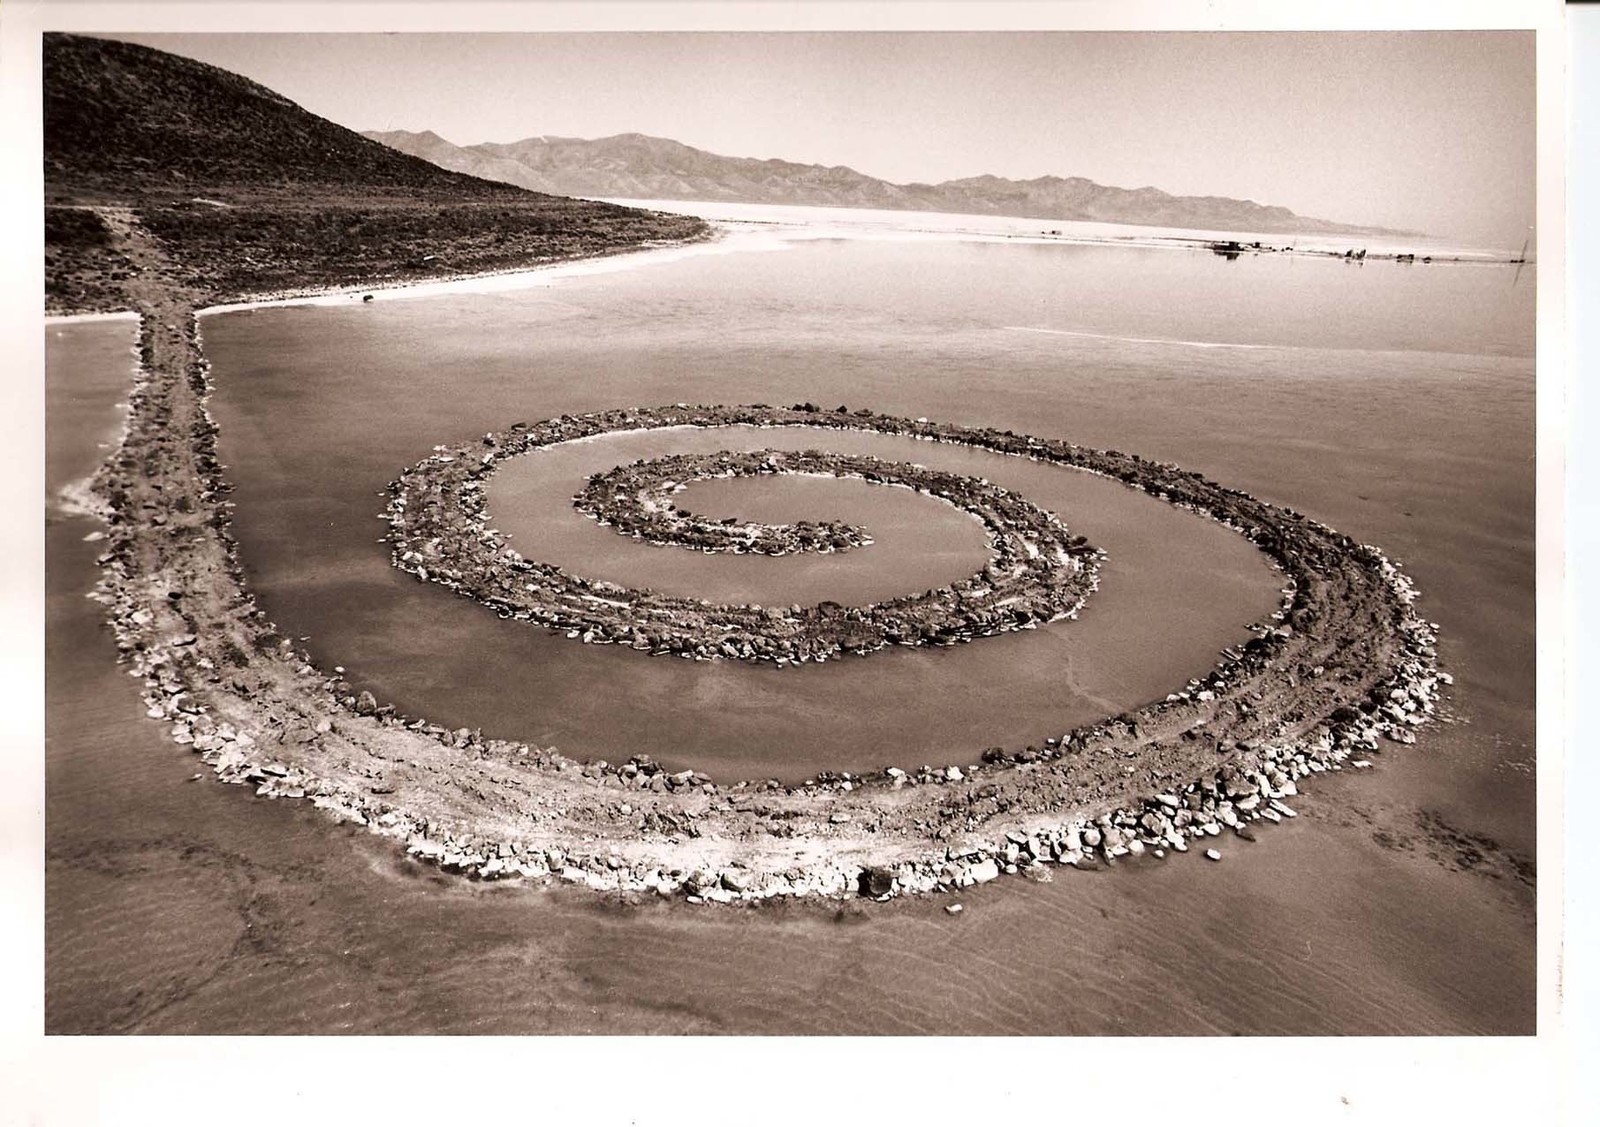 Roberth Smithson. Spiral Jetty. 1970. Great Salt lake of Utah (is now submerged below water's surface). &copy; Dwan Gallery, New York